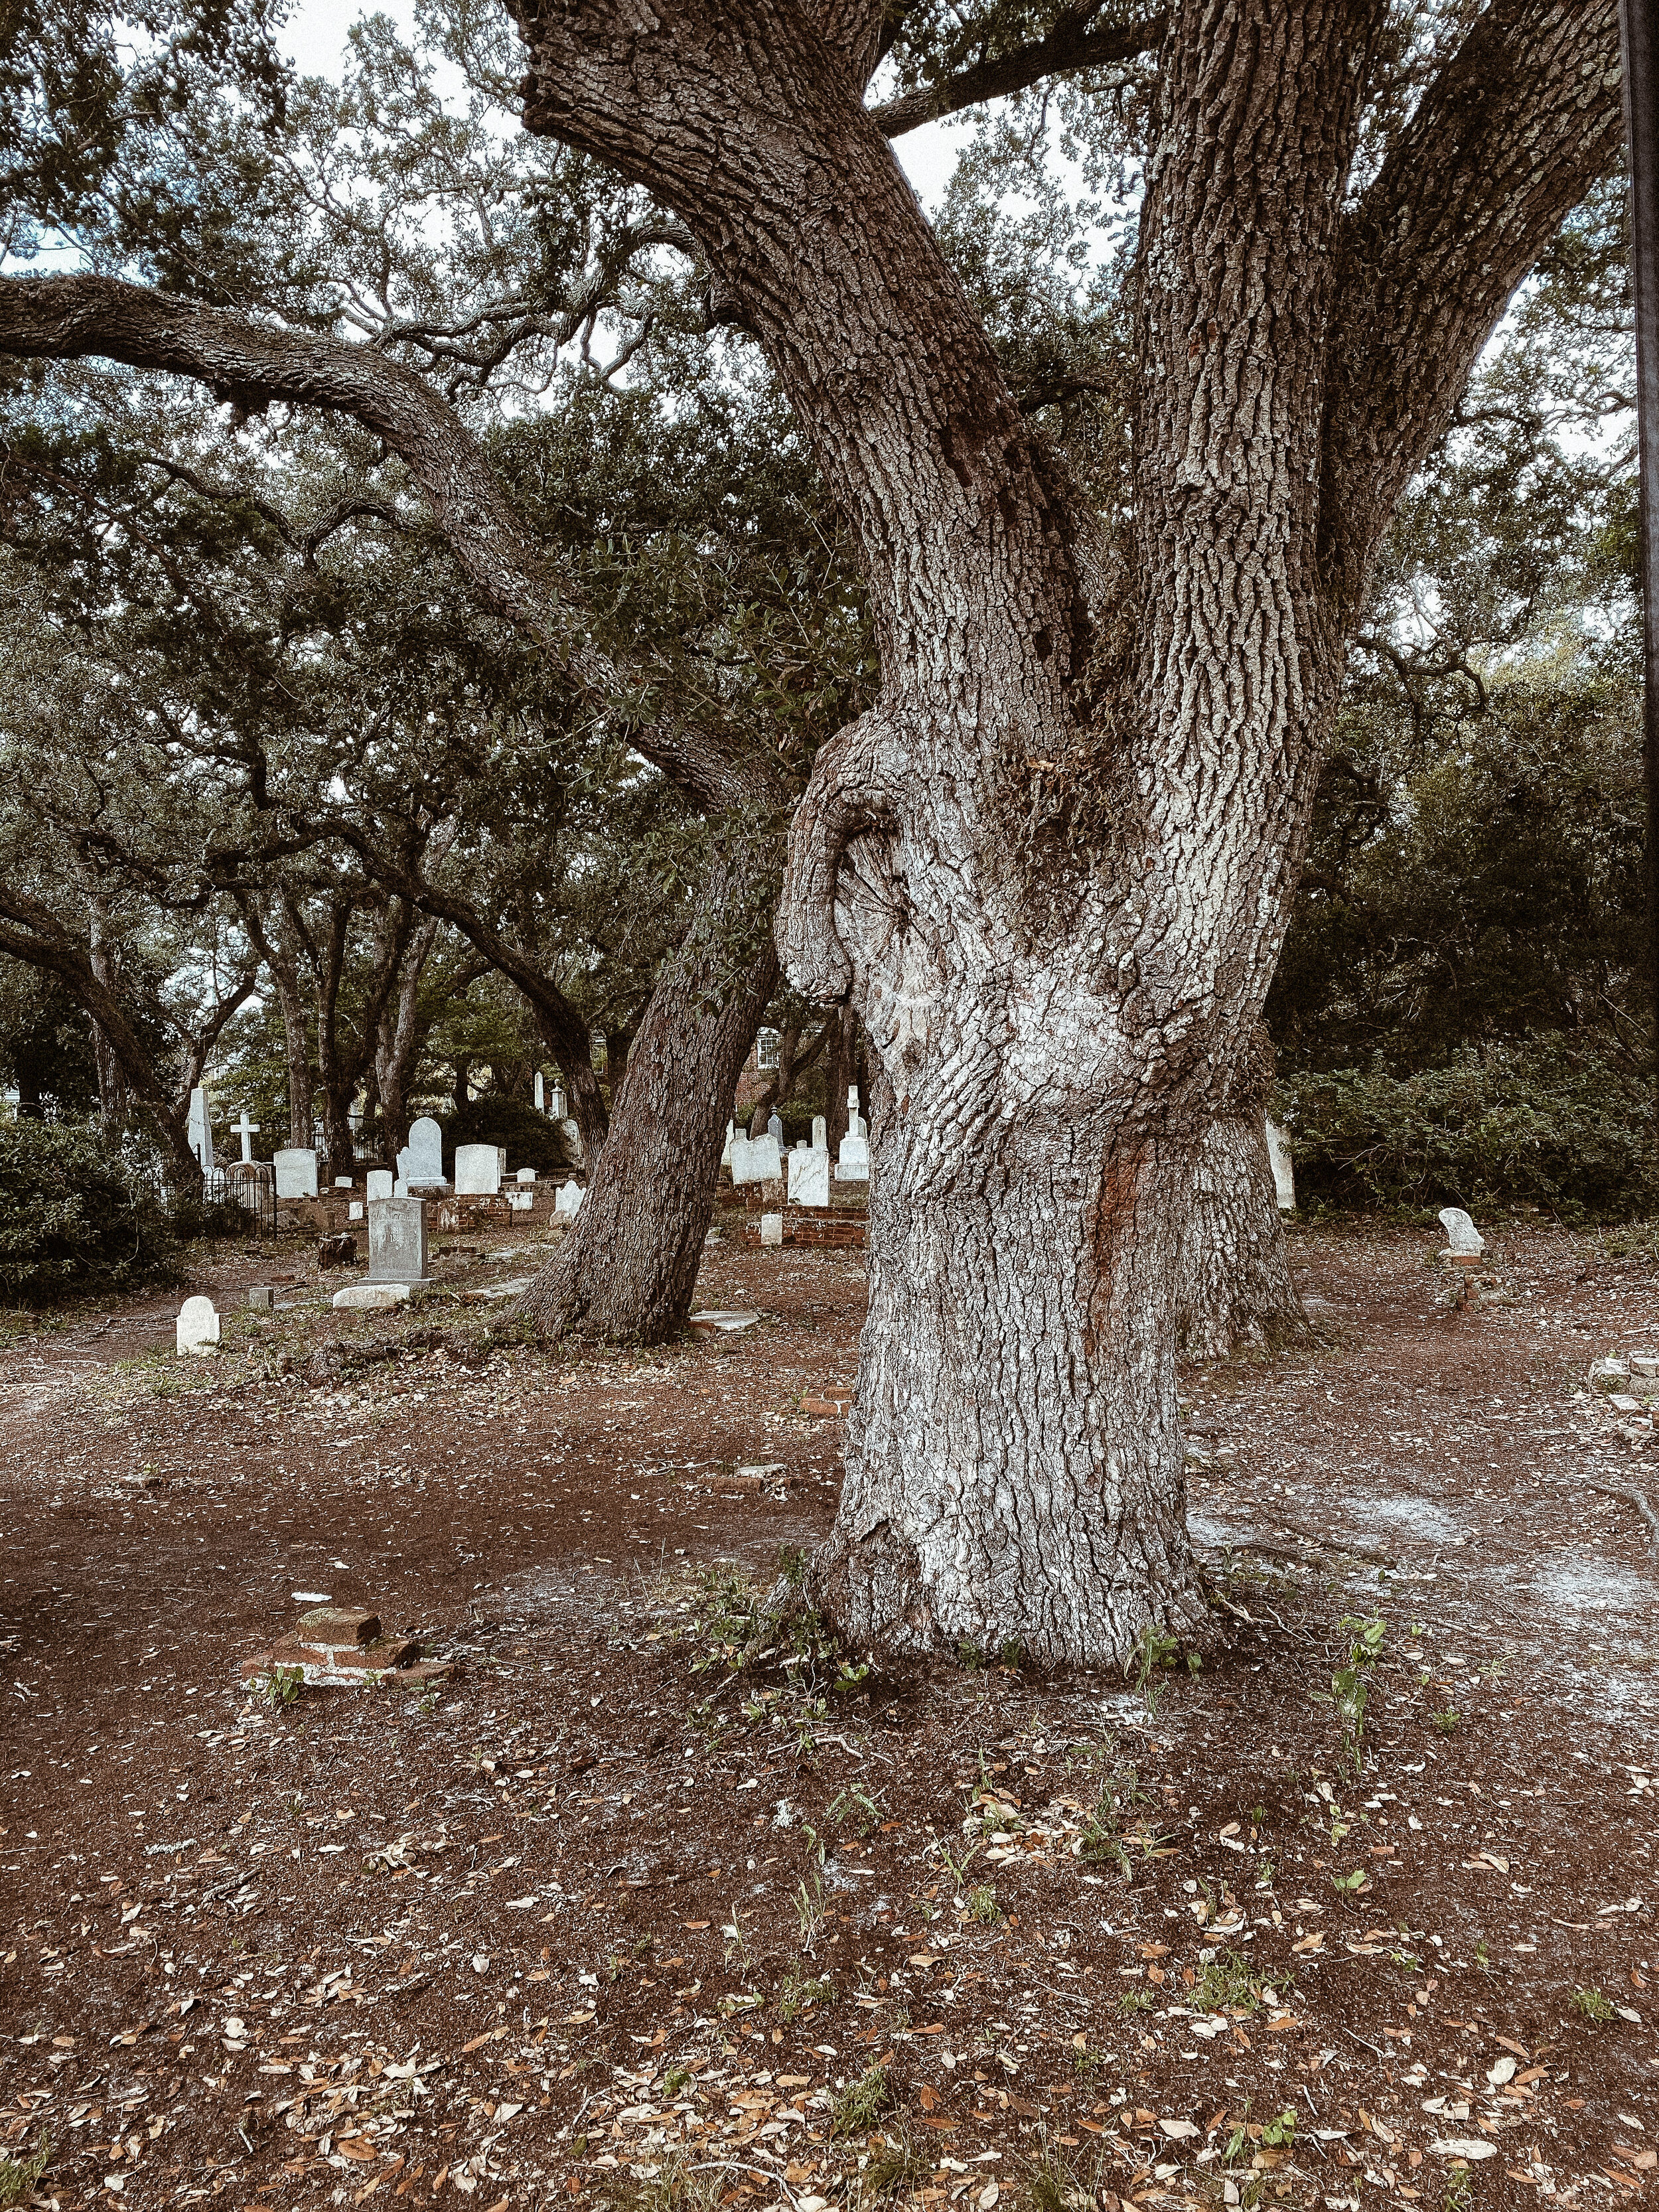 The Old Burying grounds in Beaufort